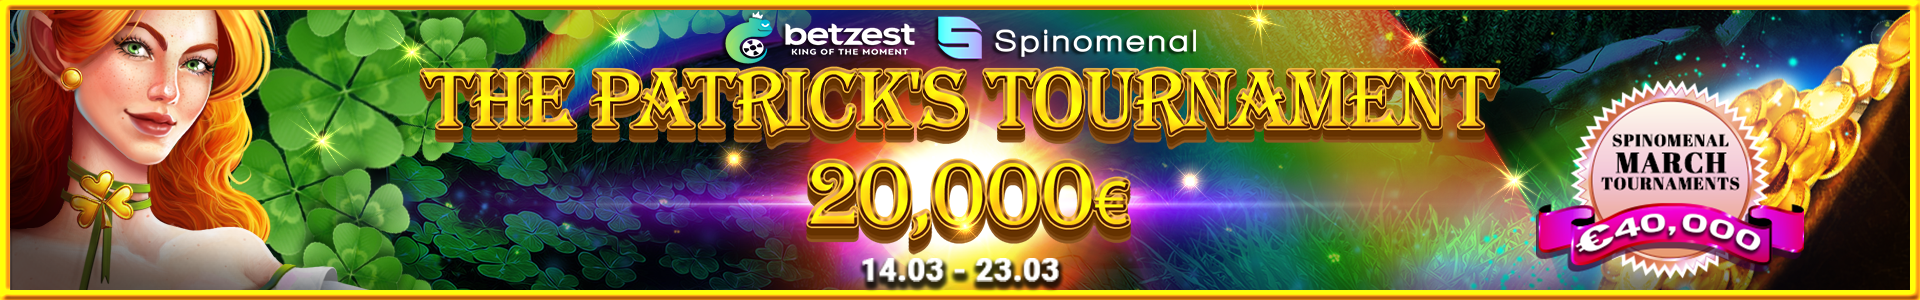 Grab a massive share of €40,000 prize pool!